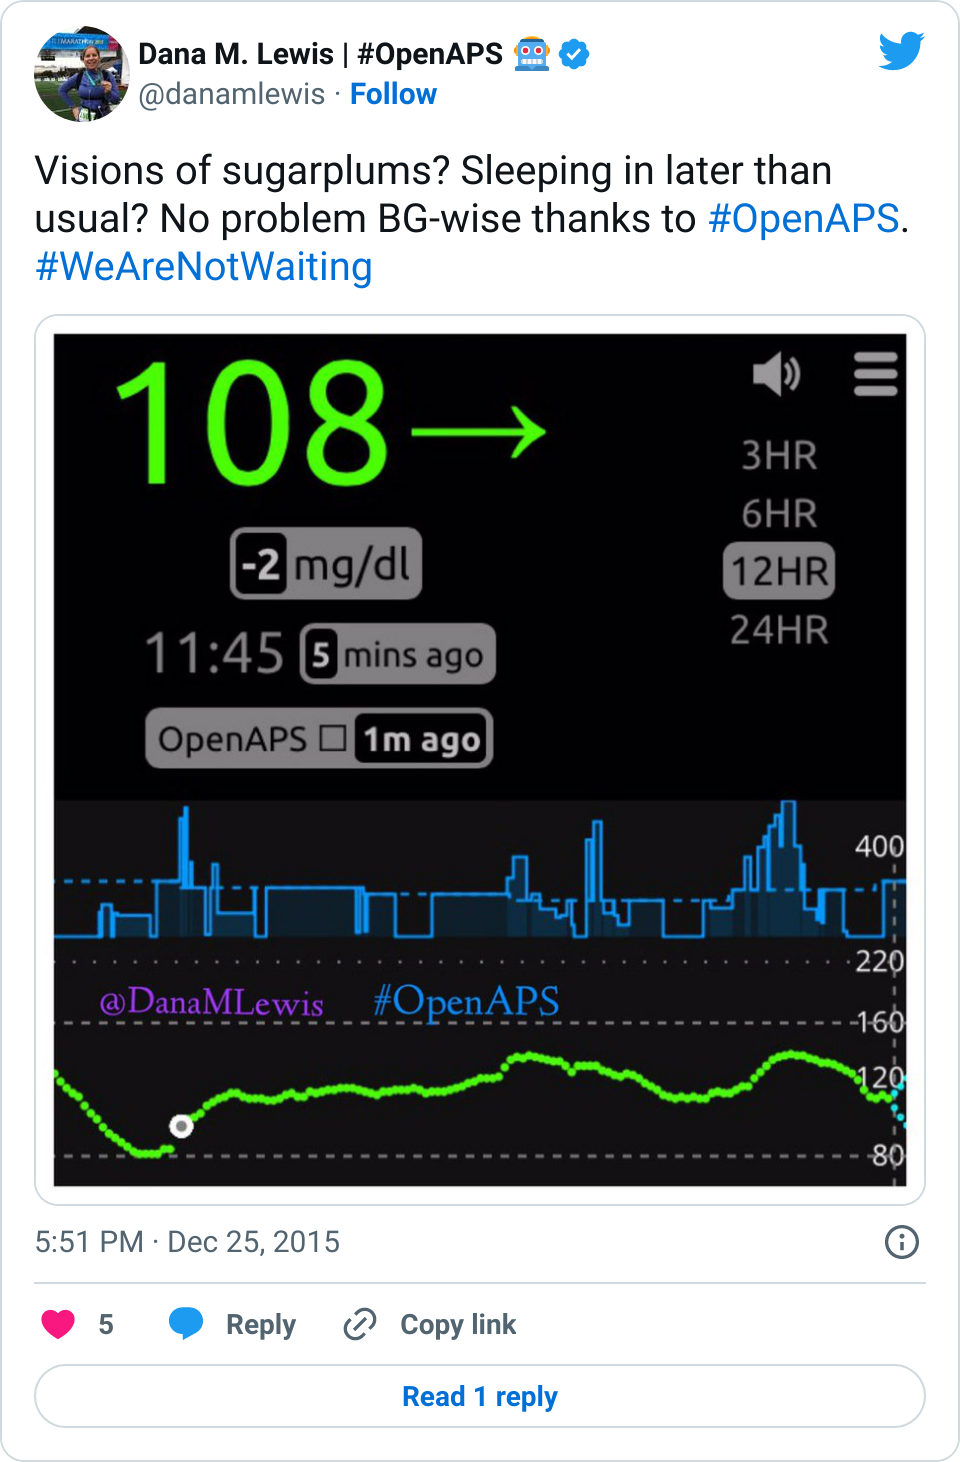 Overnight safely looping with OpenAPS